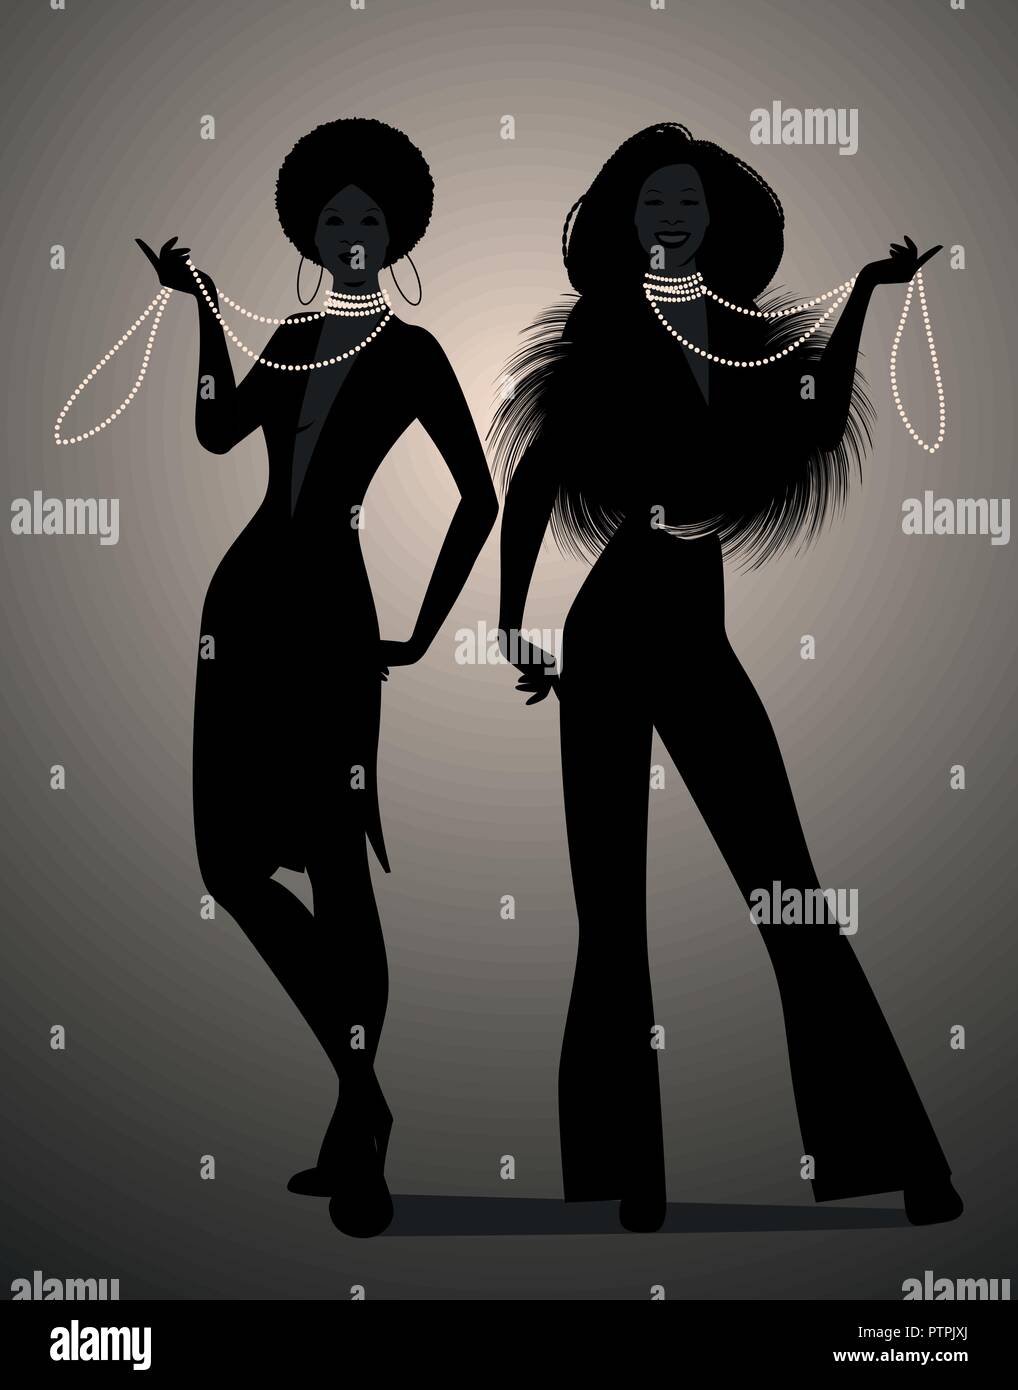 Silhouettes of two girls dancing soul, funky or disco music style Stock Vector